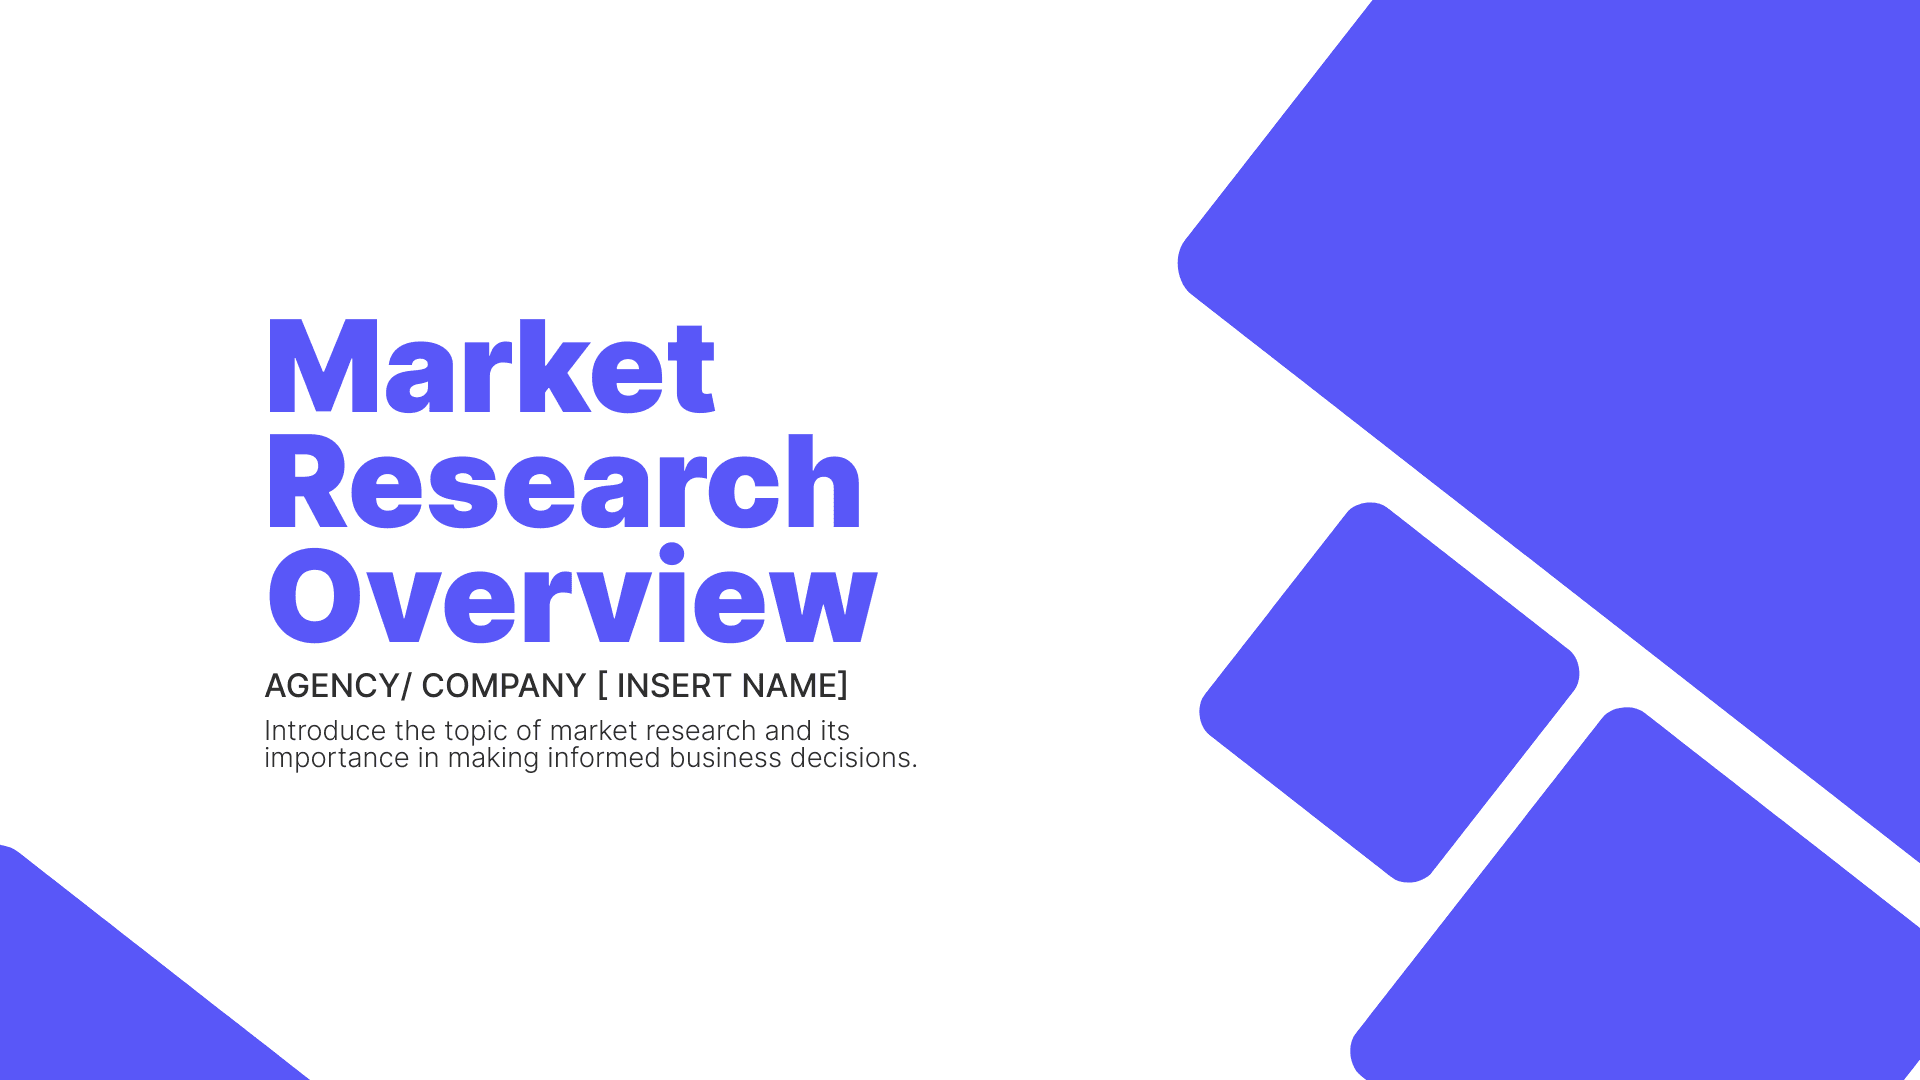 market-research-overview-present-template-thumbnail-img